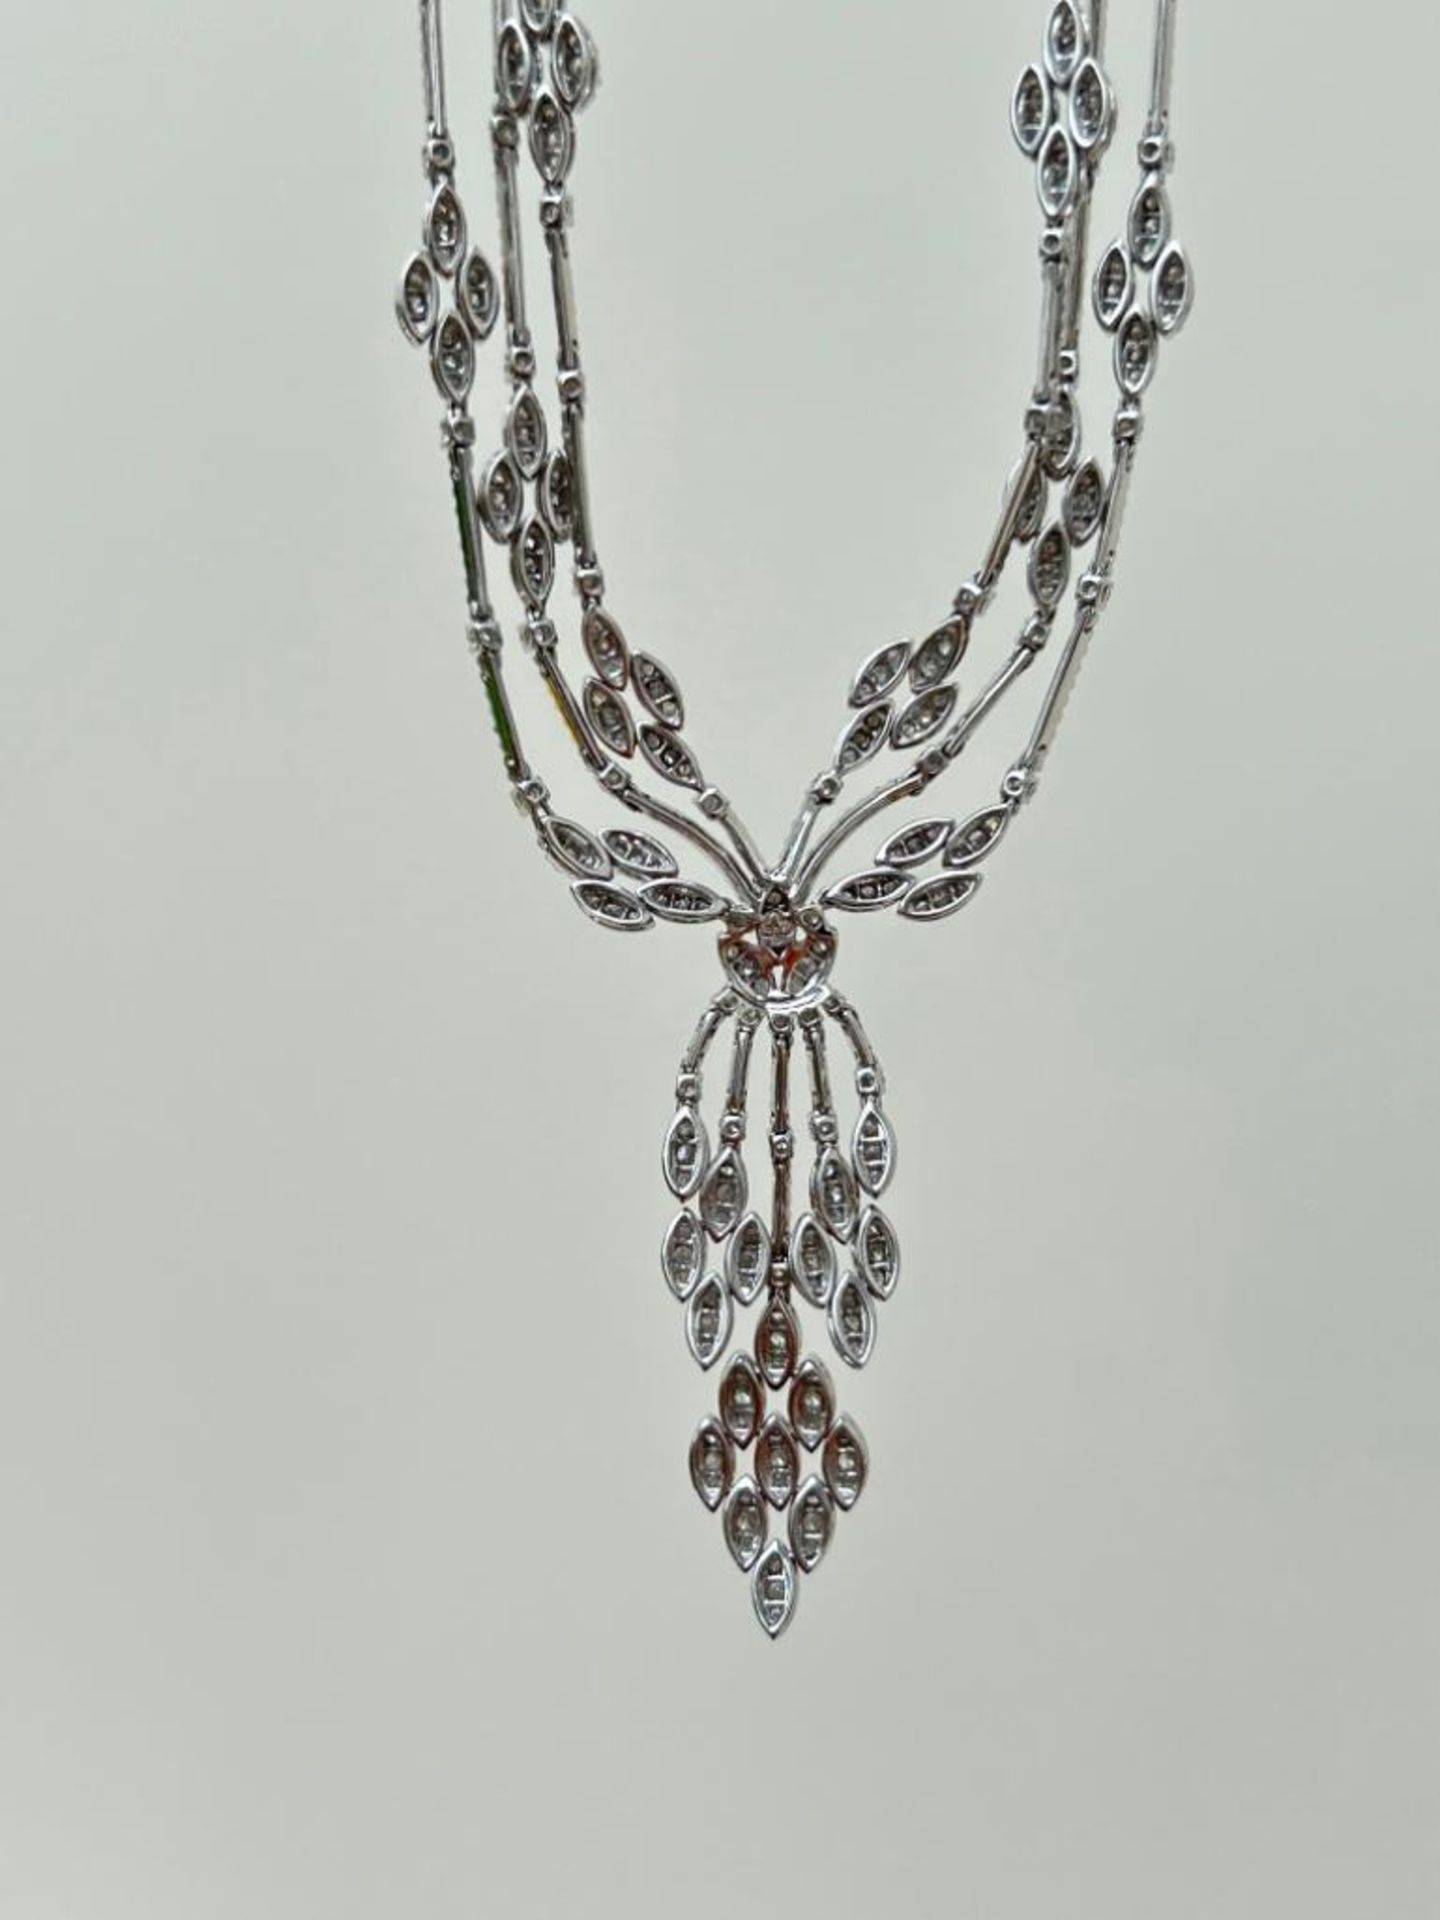 18ct White Gold and 10 Carat Plus Diamond Necklace - Image 12 of 14